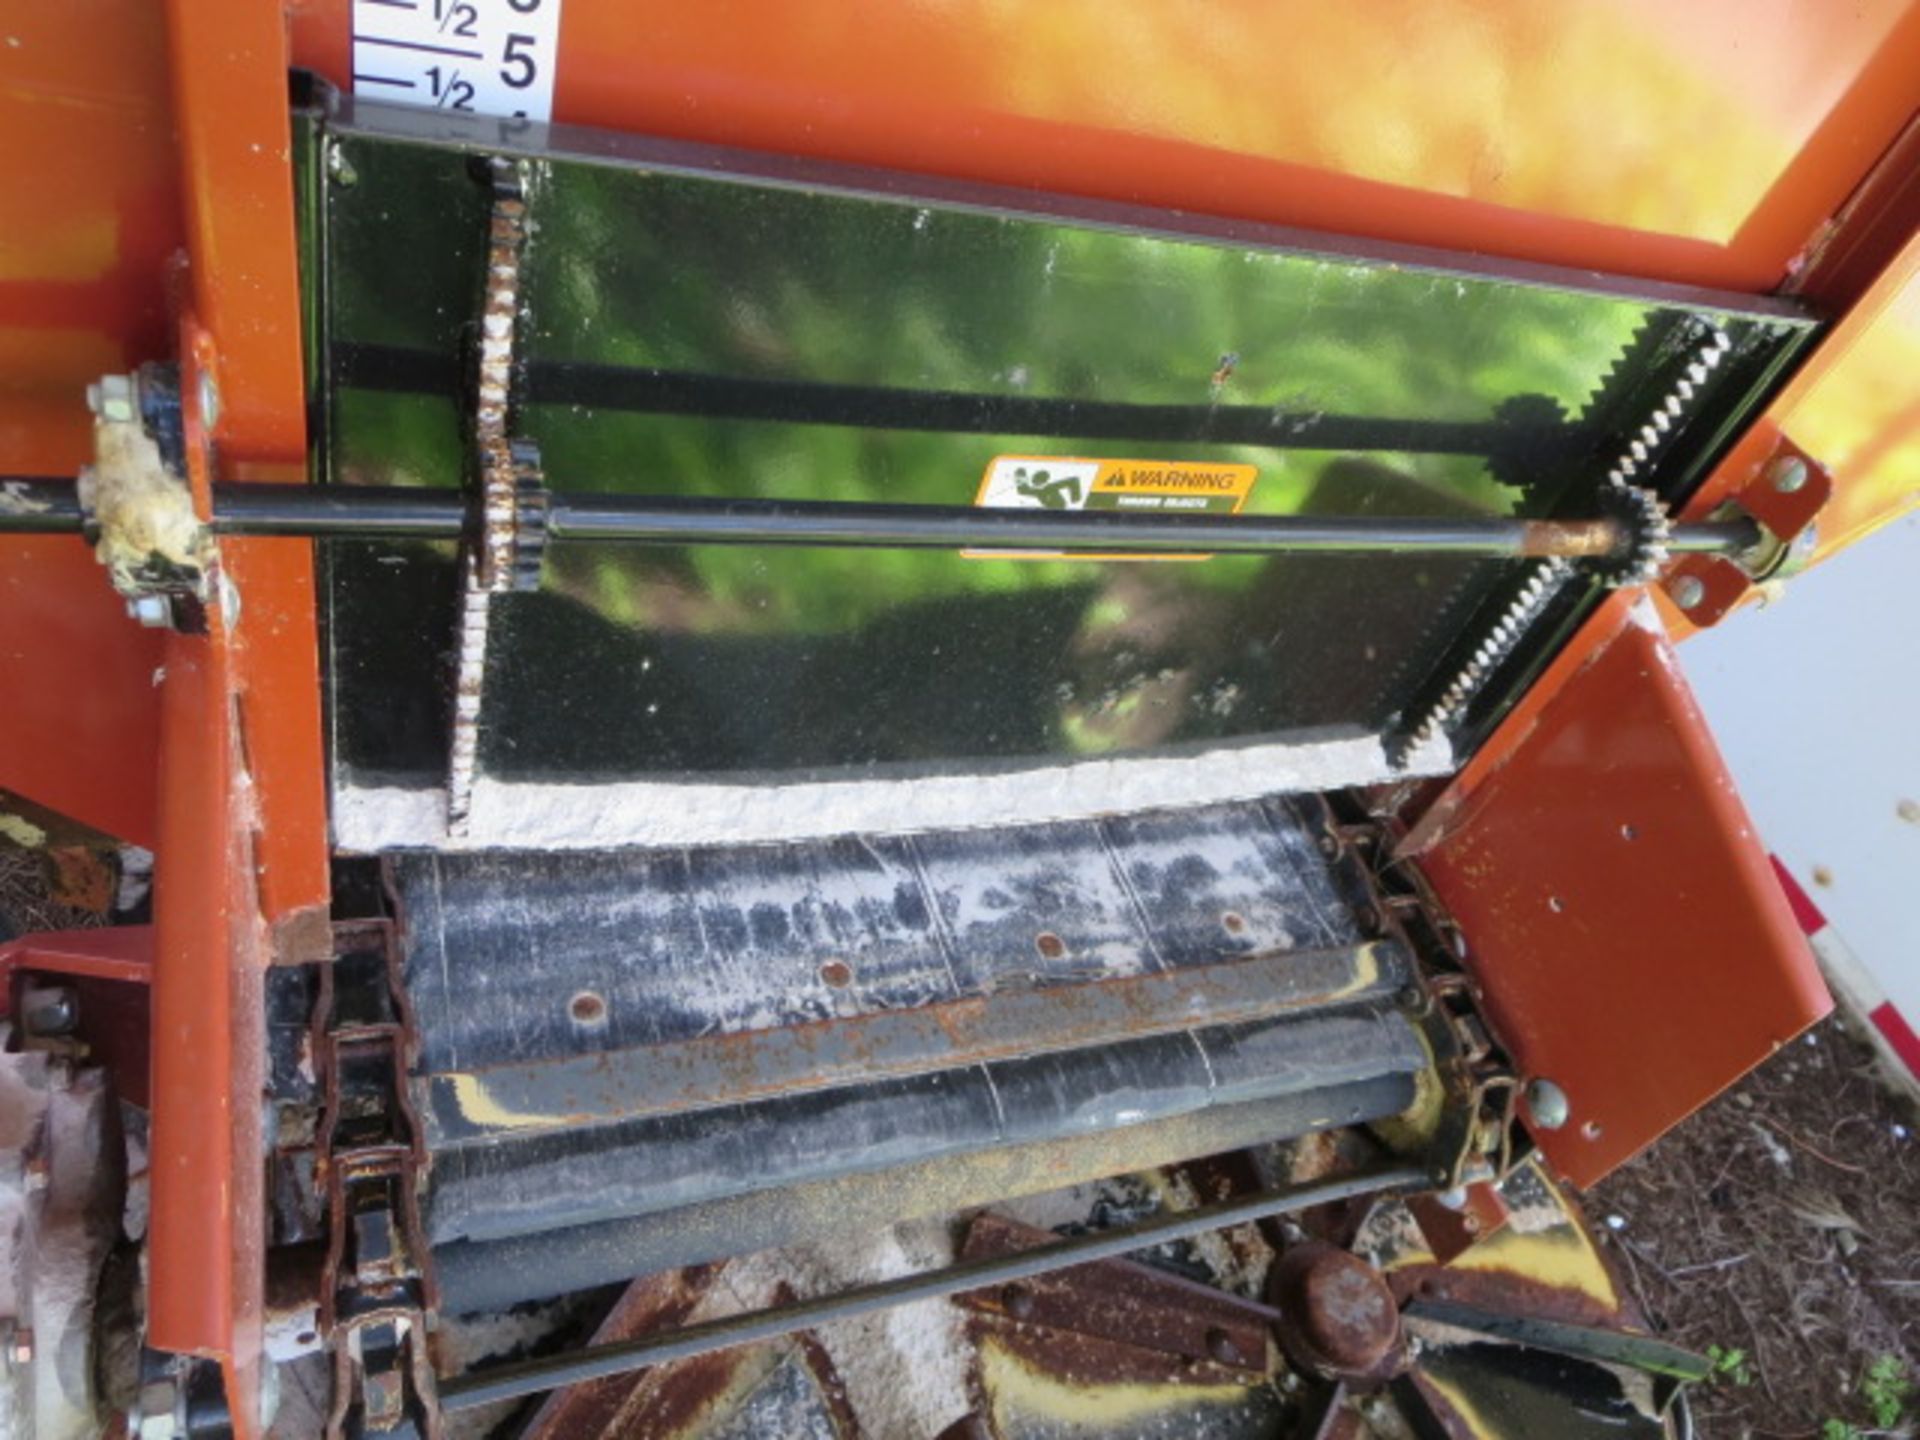 2016 Pequea Orchard Spreader Model LPV12G S/N 240; sale is subject to confirmation - Image 7 of 15